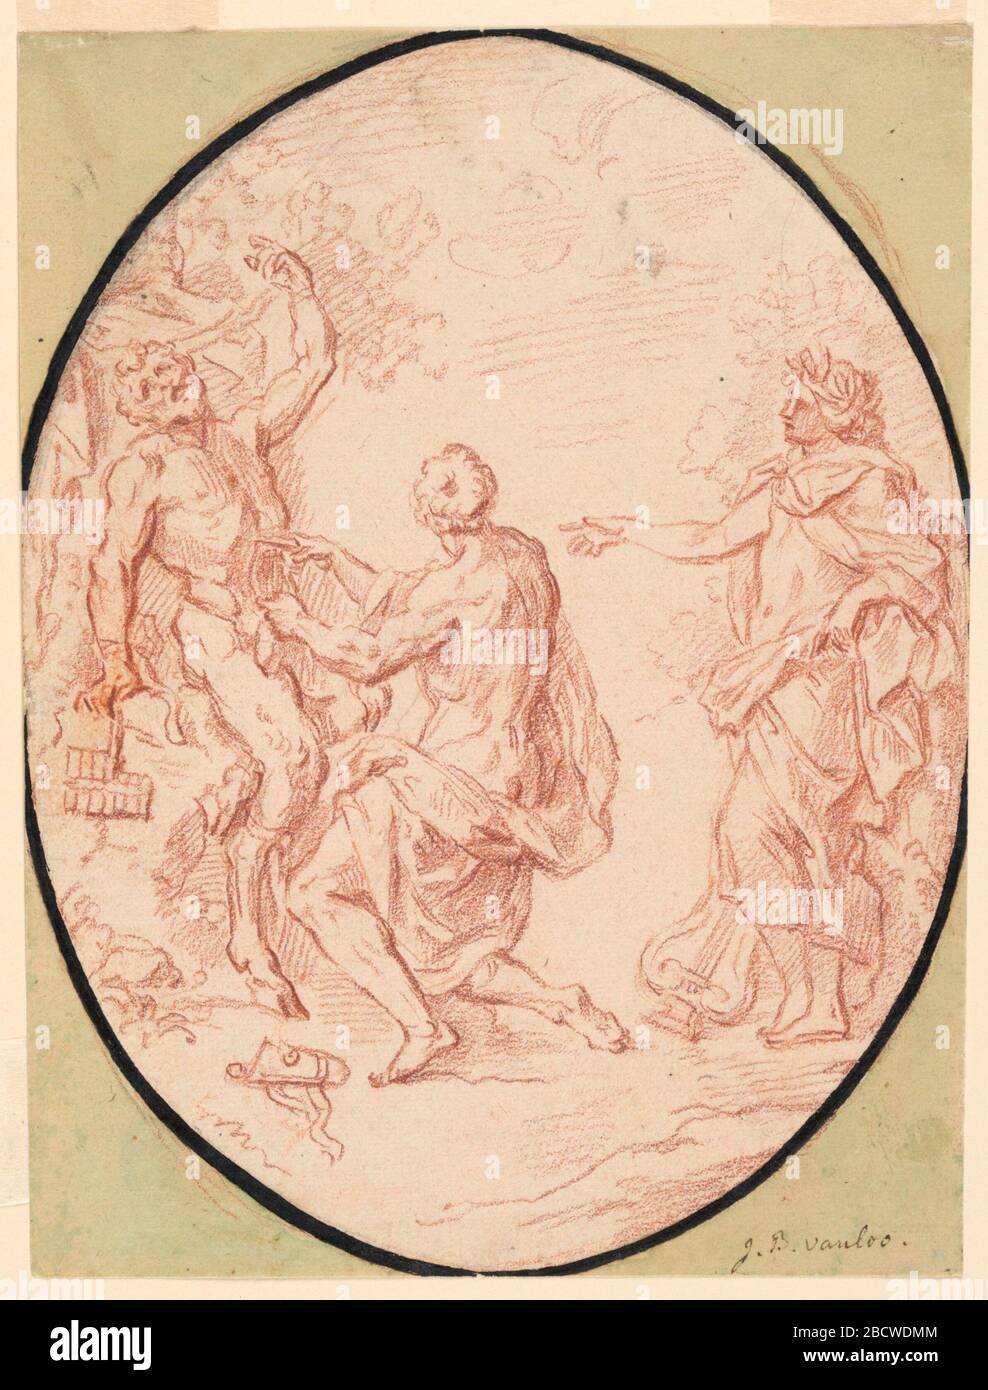 Flaying of Marsyas. Research in ProgressMarsyas is tied to a tree, at left. Apollo, standing at right, directs one of his servants, who is shown in from behind, to flay the prisoner. Flaying of Marsyas Stock Photo